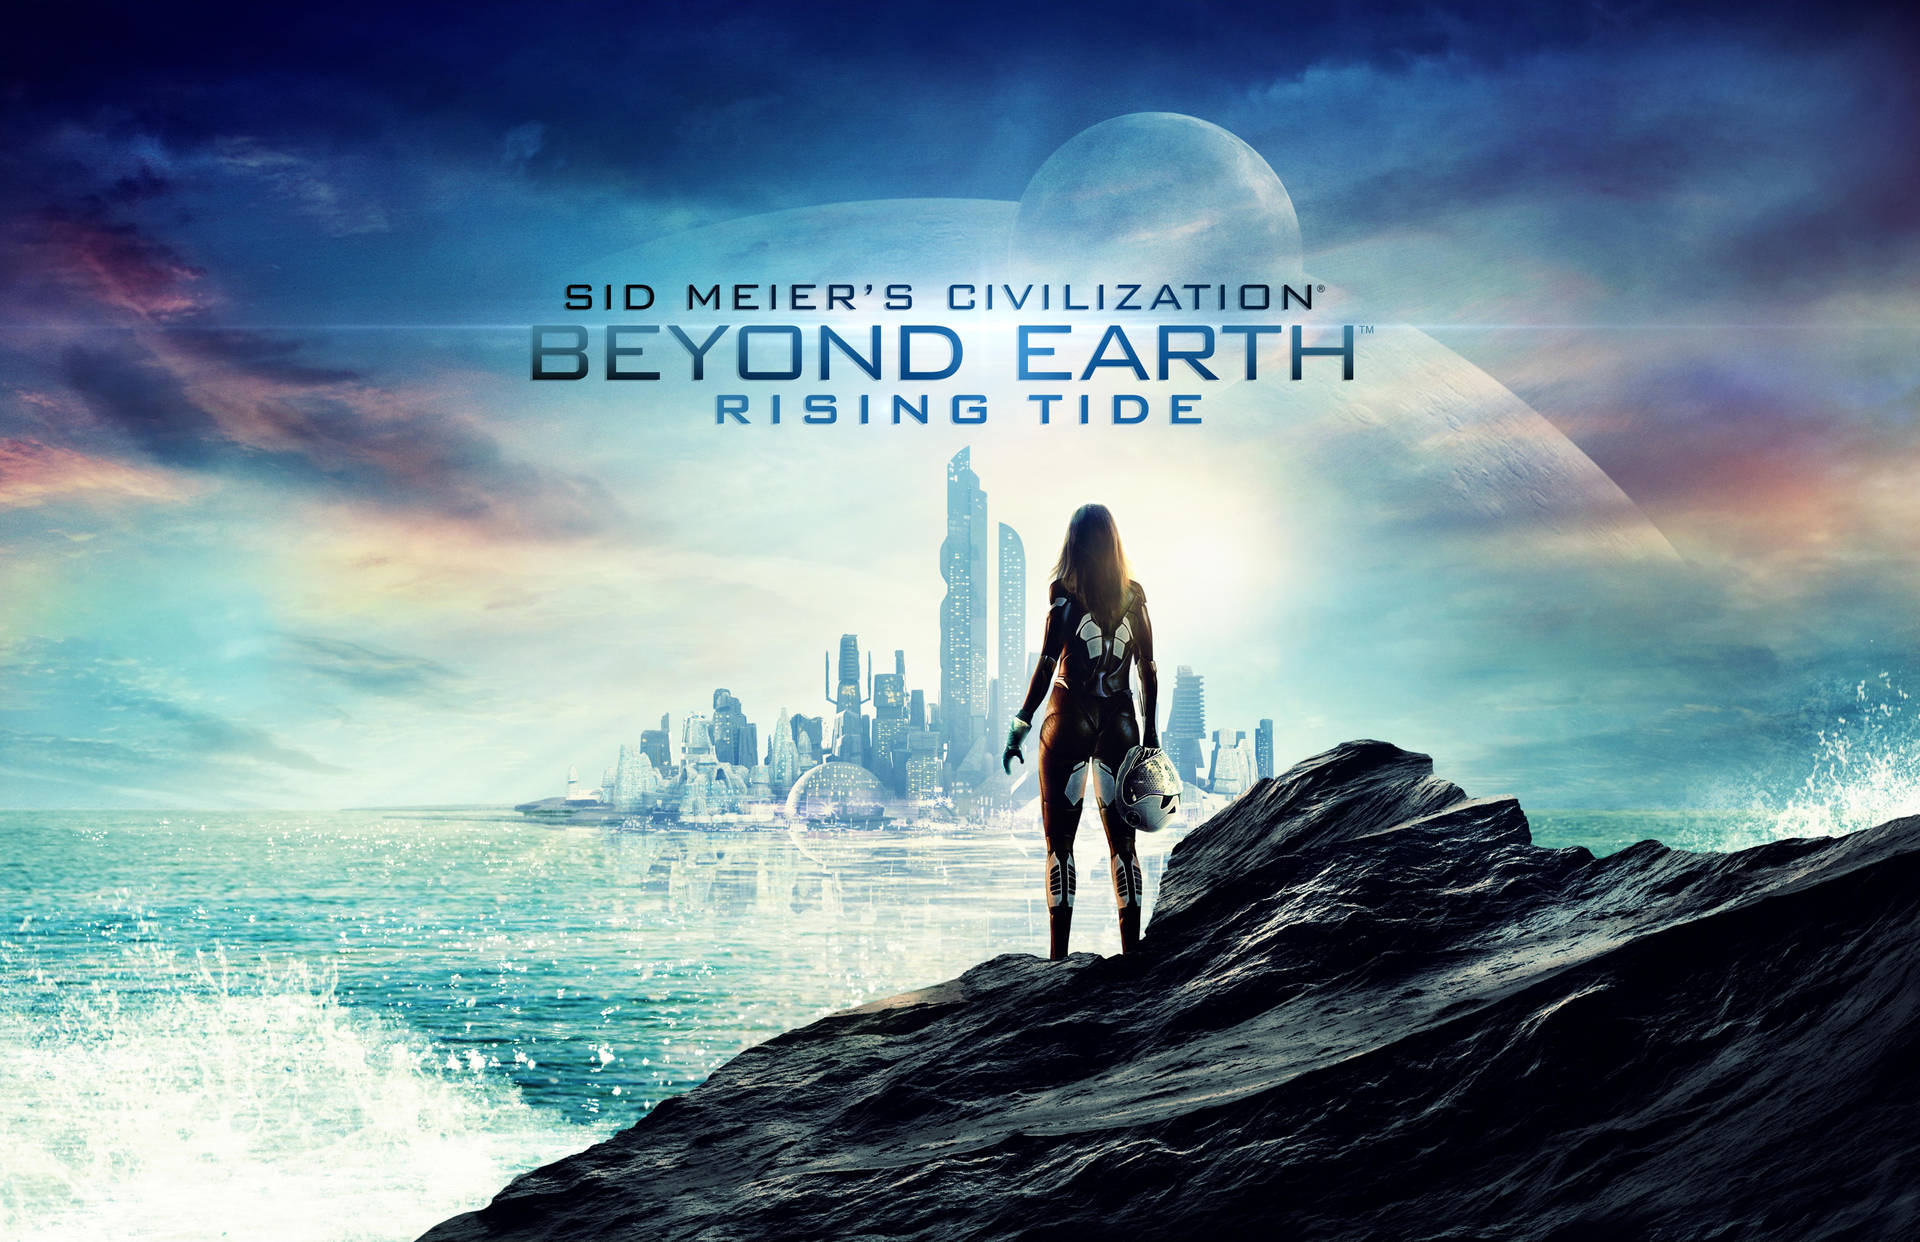 Beyond Earth Rising Tide Civilization Beyond Earth Background